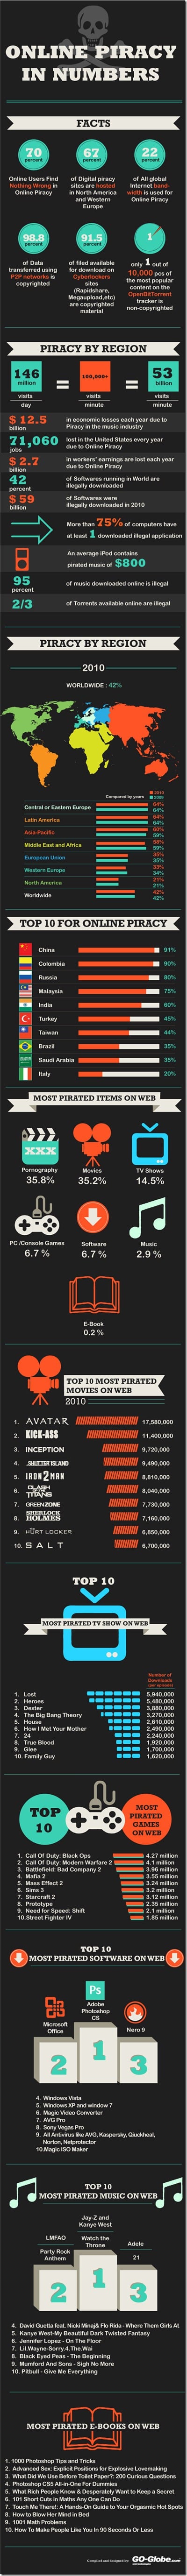 Infographic: Piracy Numbers and Stats